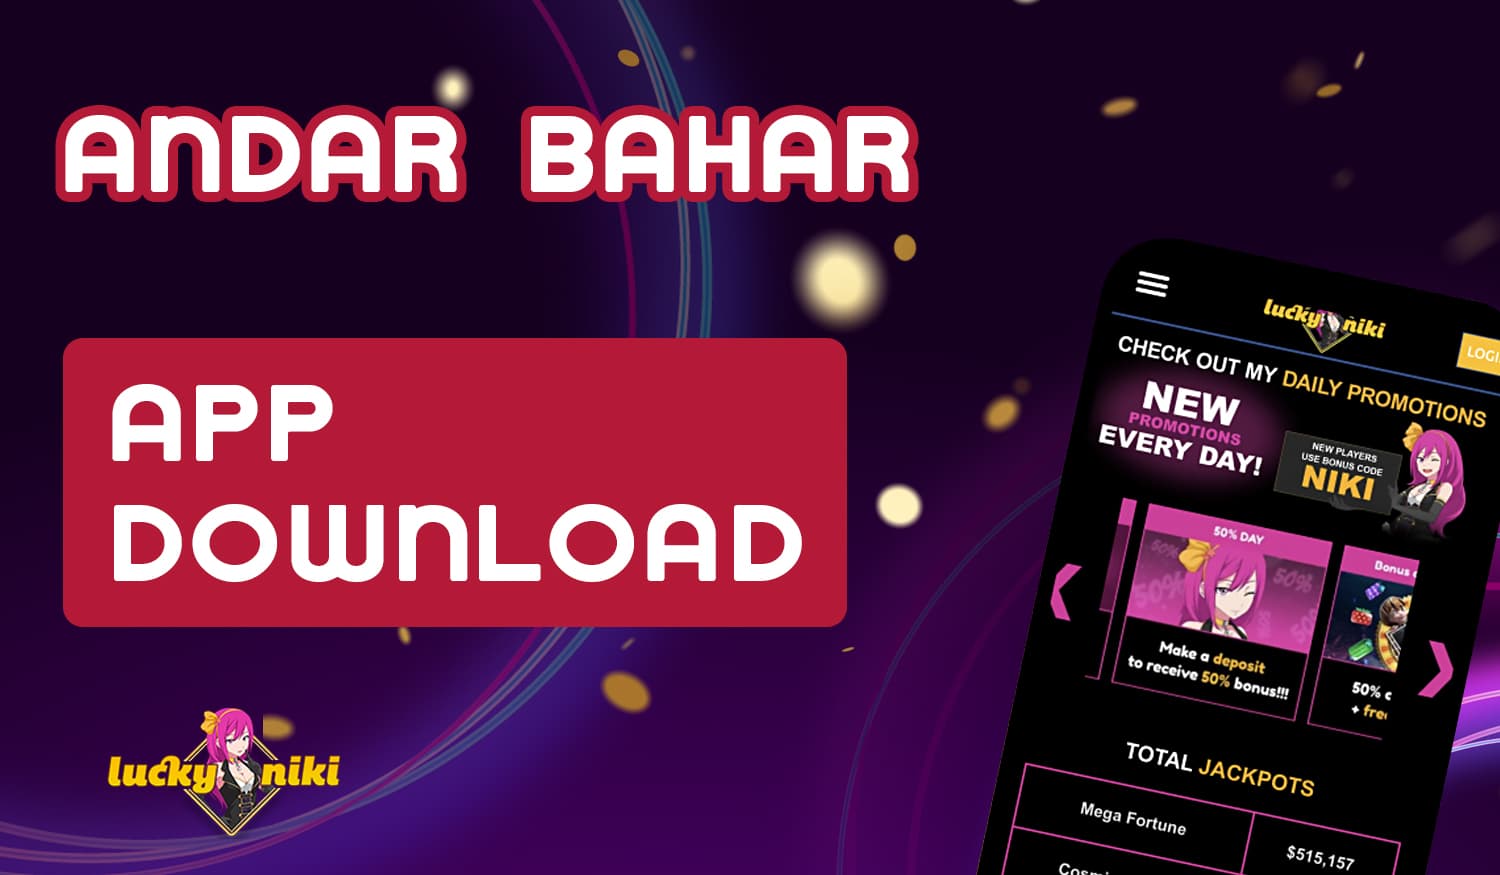 How to start playing andar bahar with LuckyNiki Casino mobile application in India